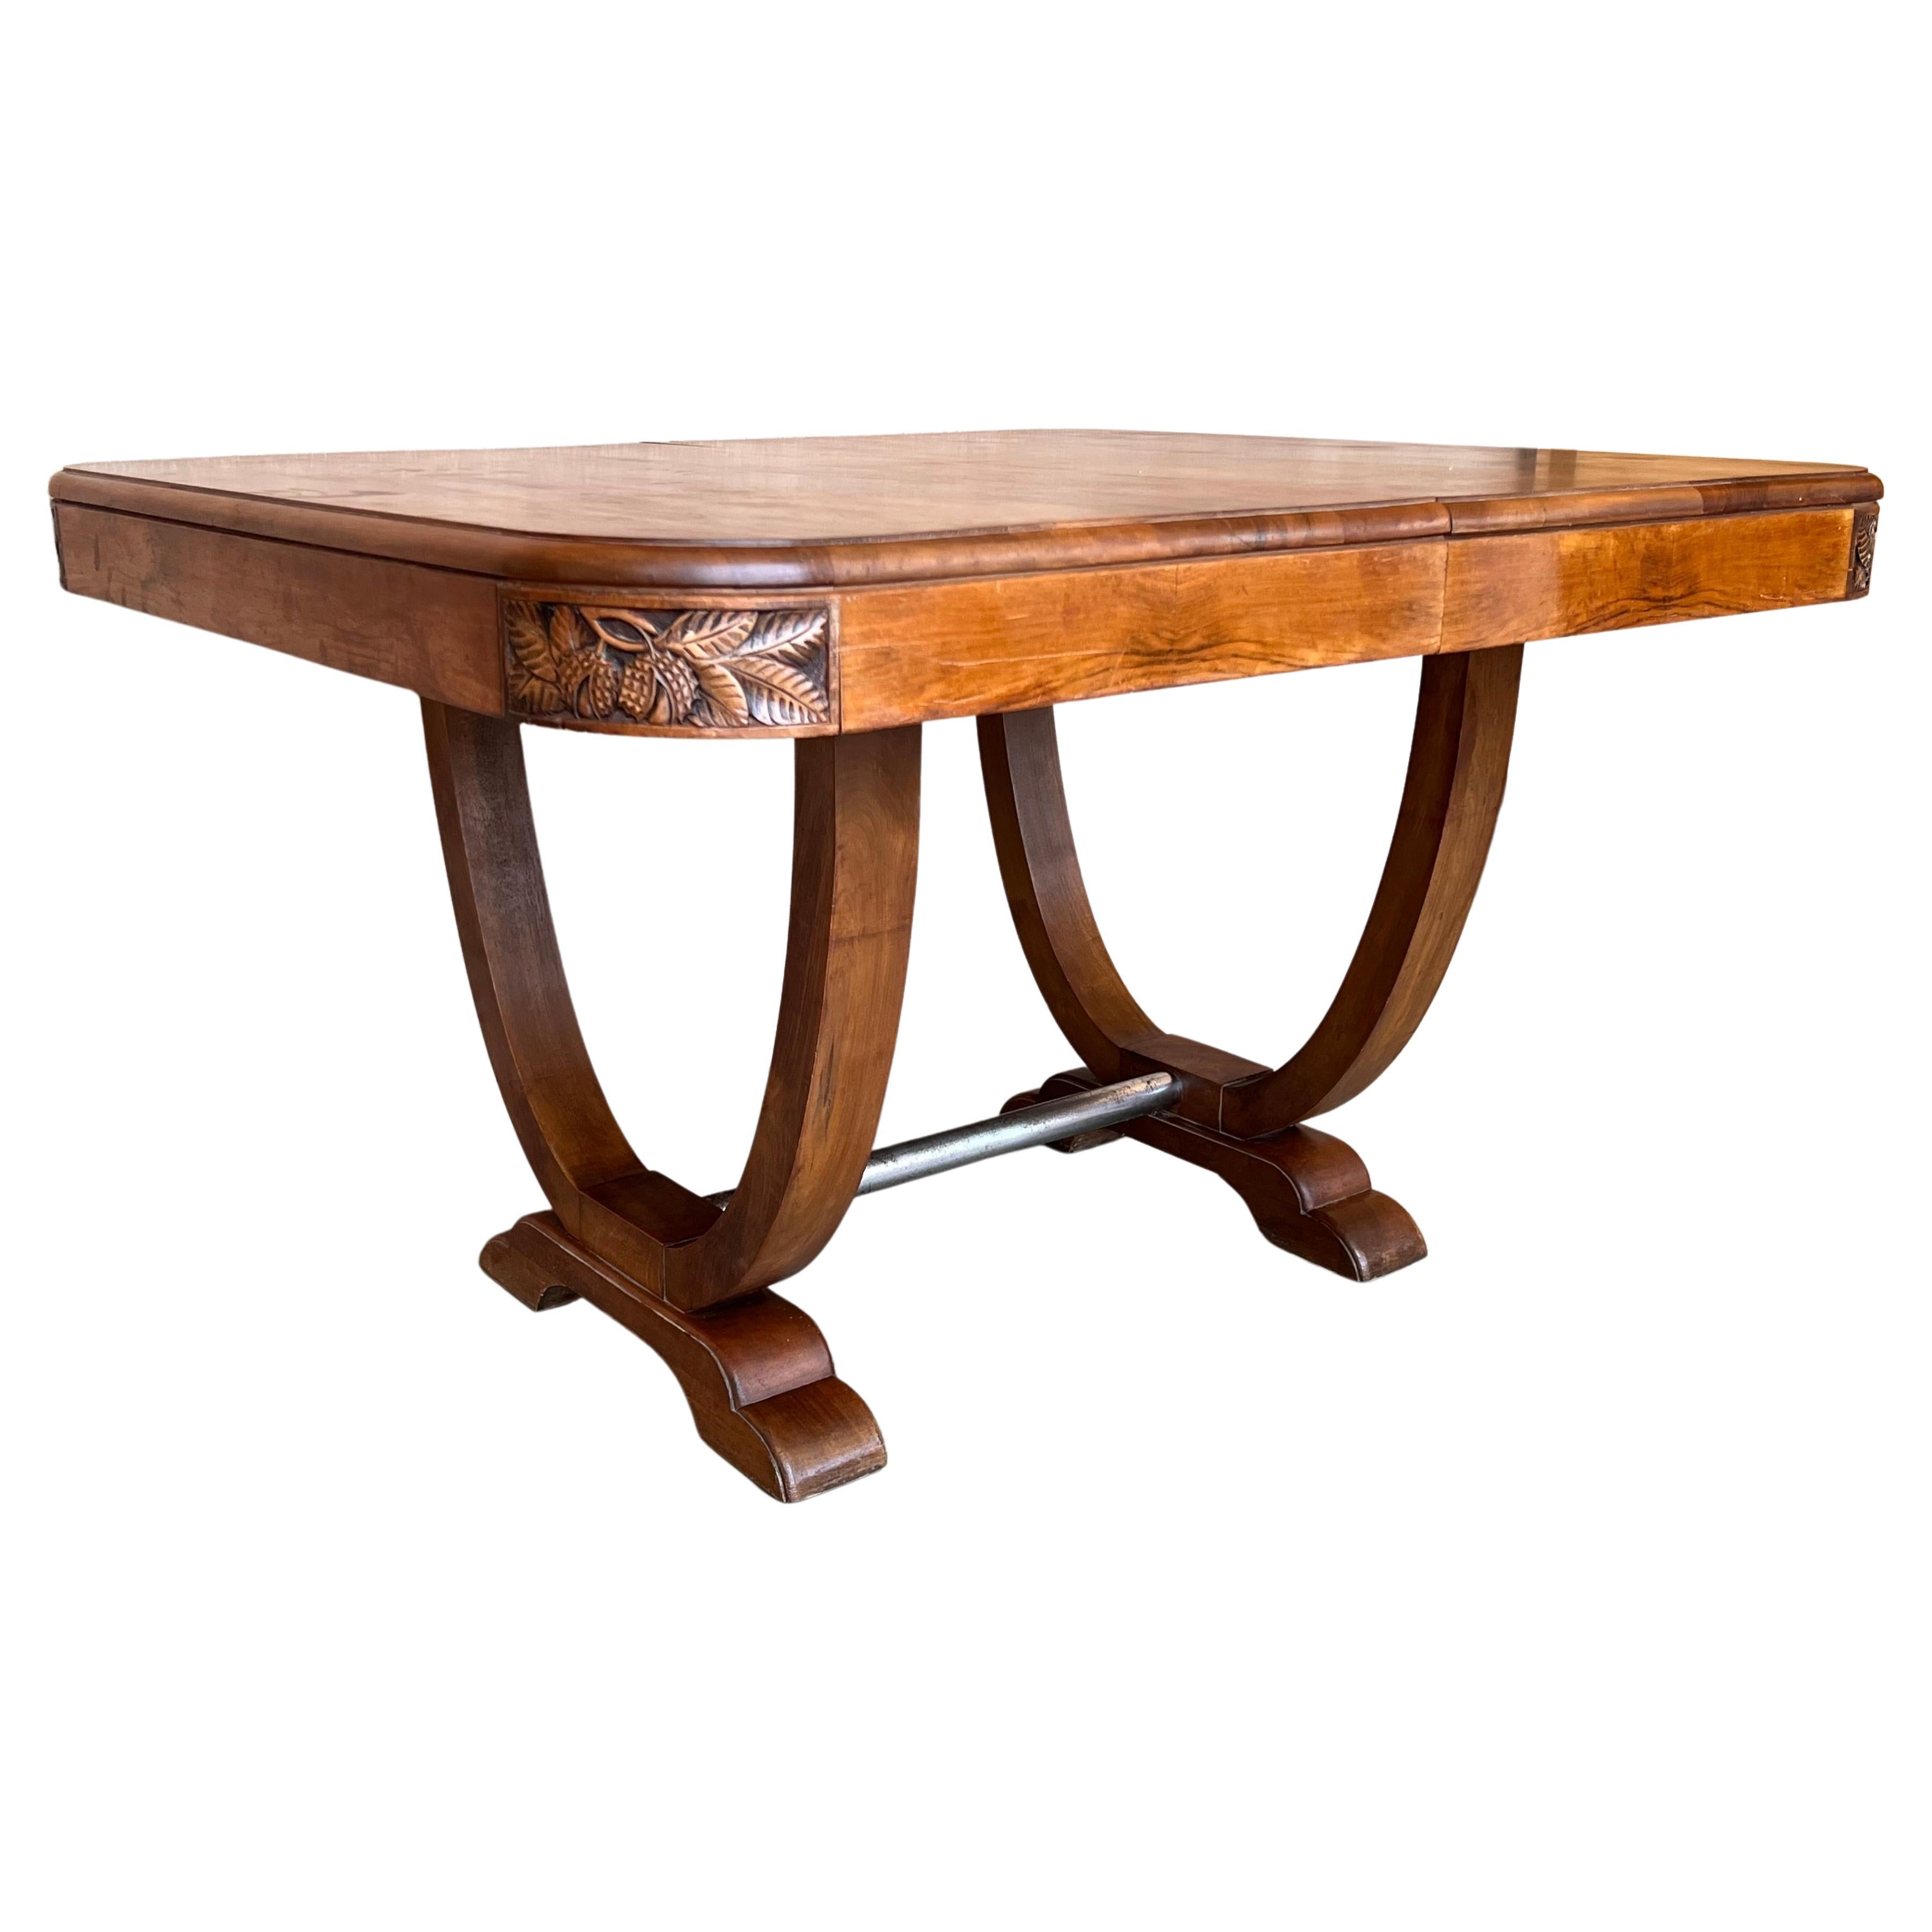 Art Deco Mid-Century Walnut Dining Table with Extensions and Carved Edges